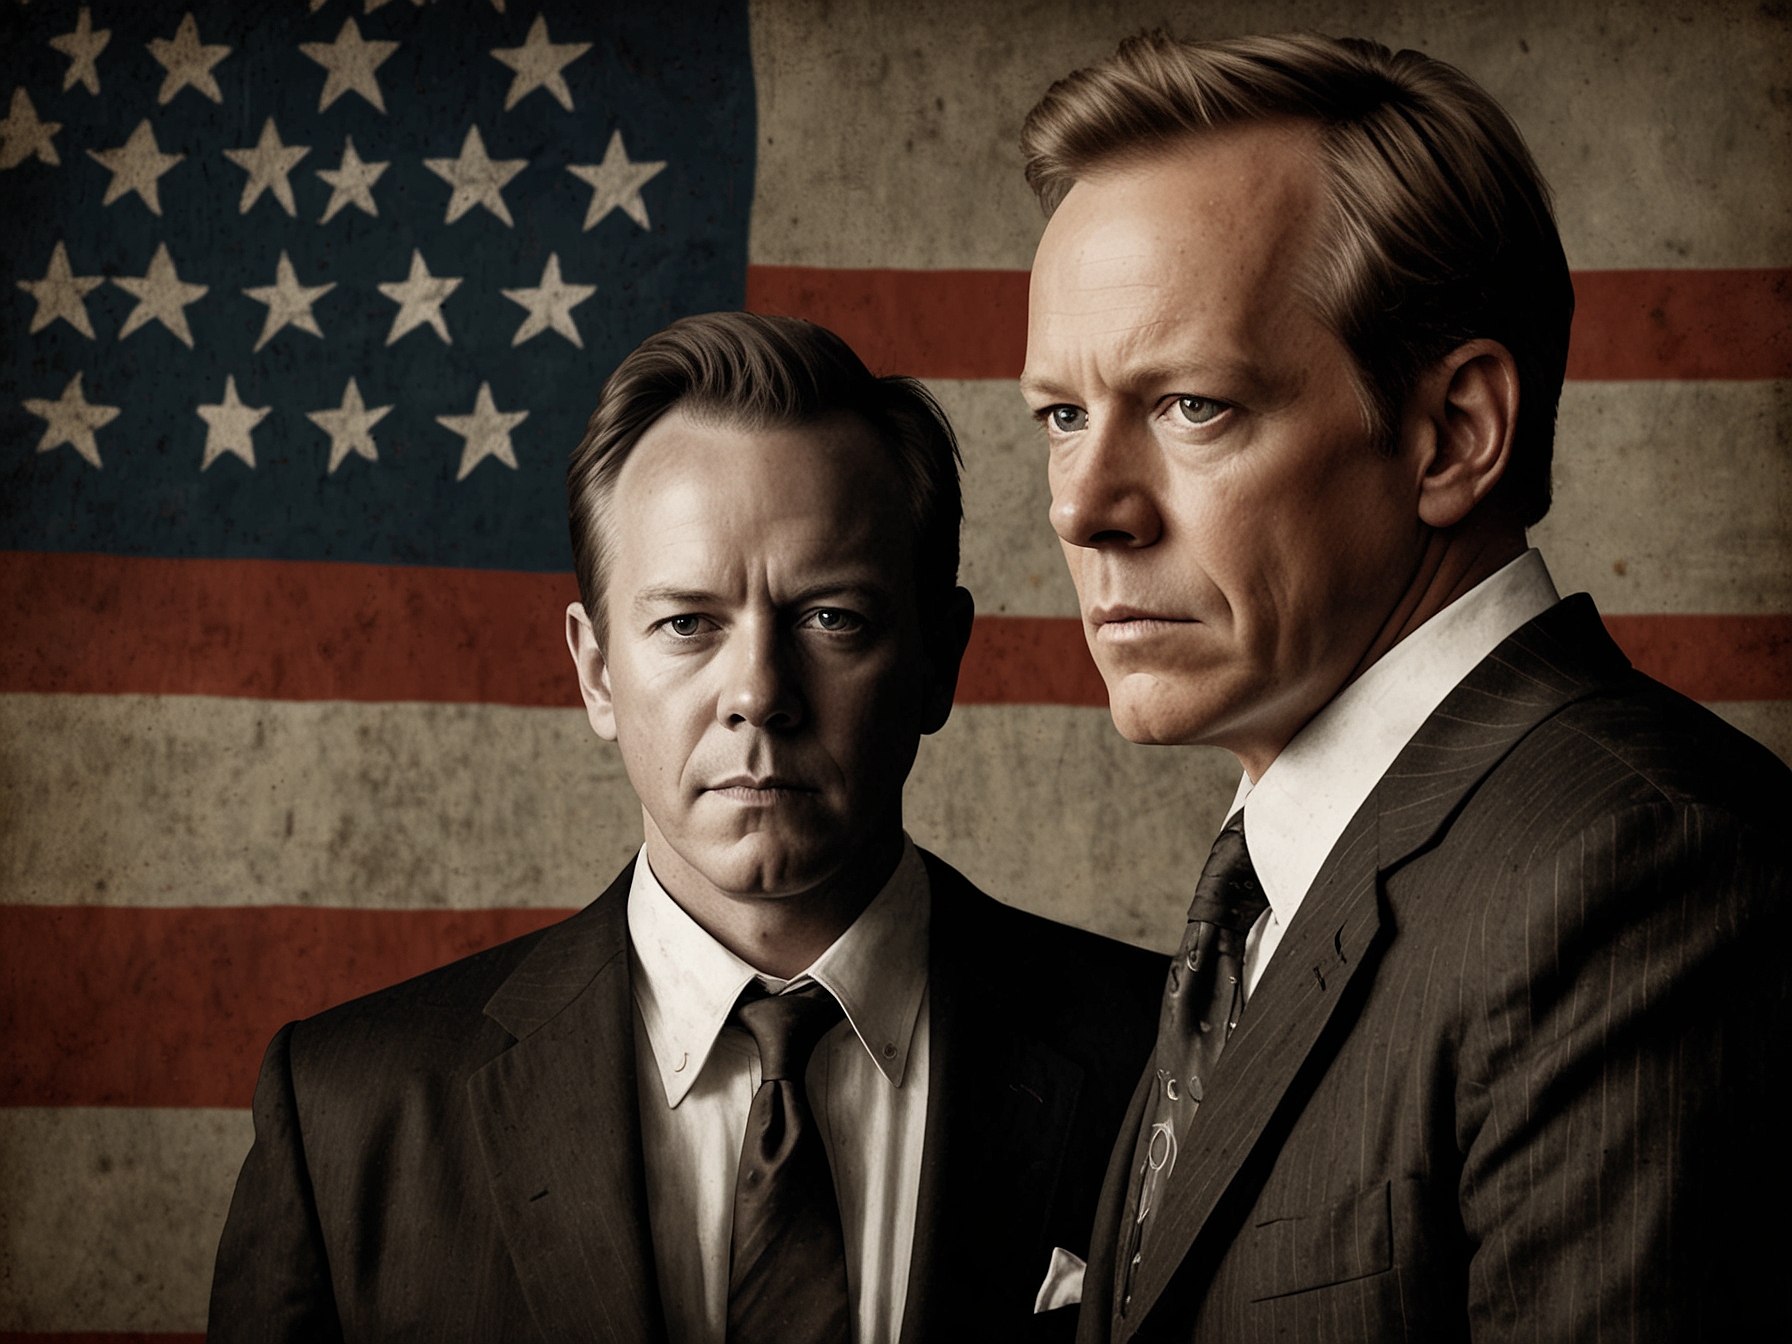 Kiefer Sutherland as John Henry Clayton faces off against threats from a ruthless businessman, showcasing a gripping performance rooted in complex familial dynamics.